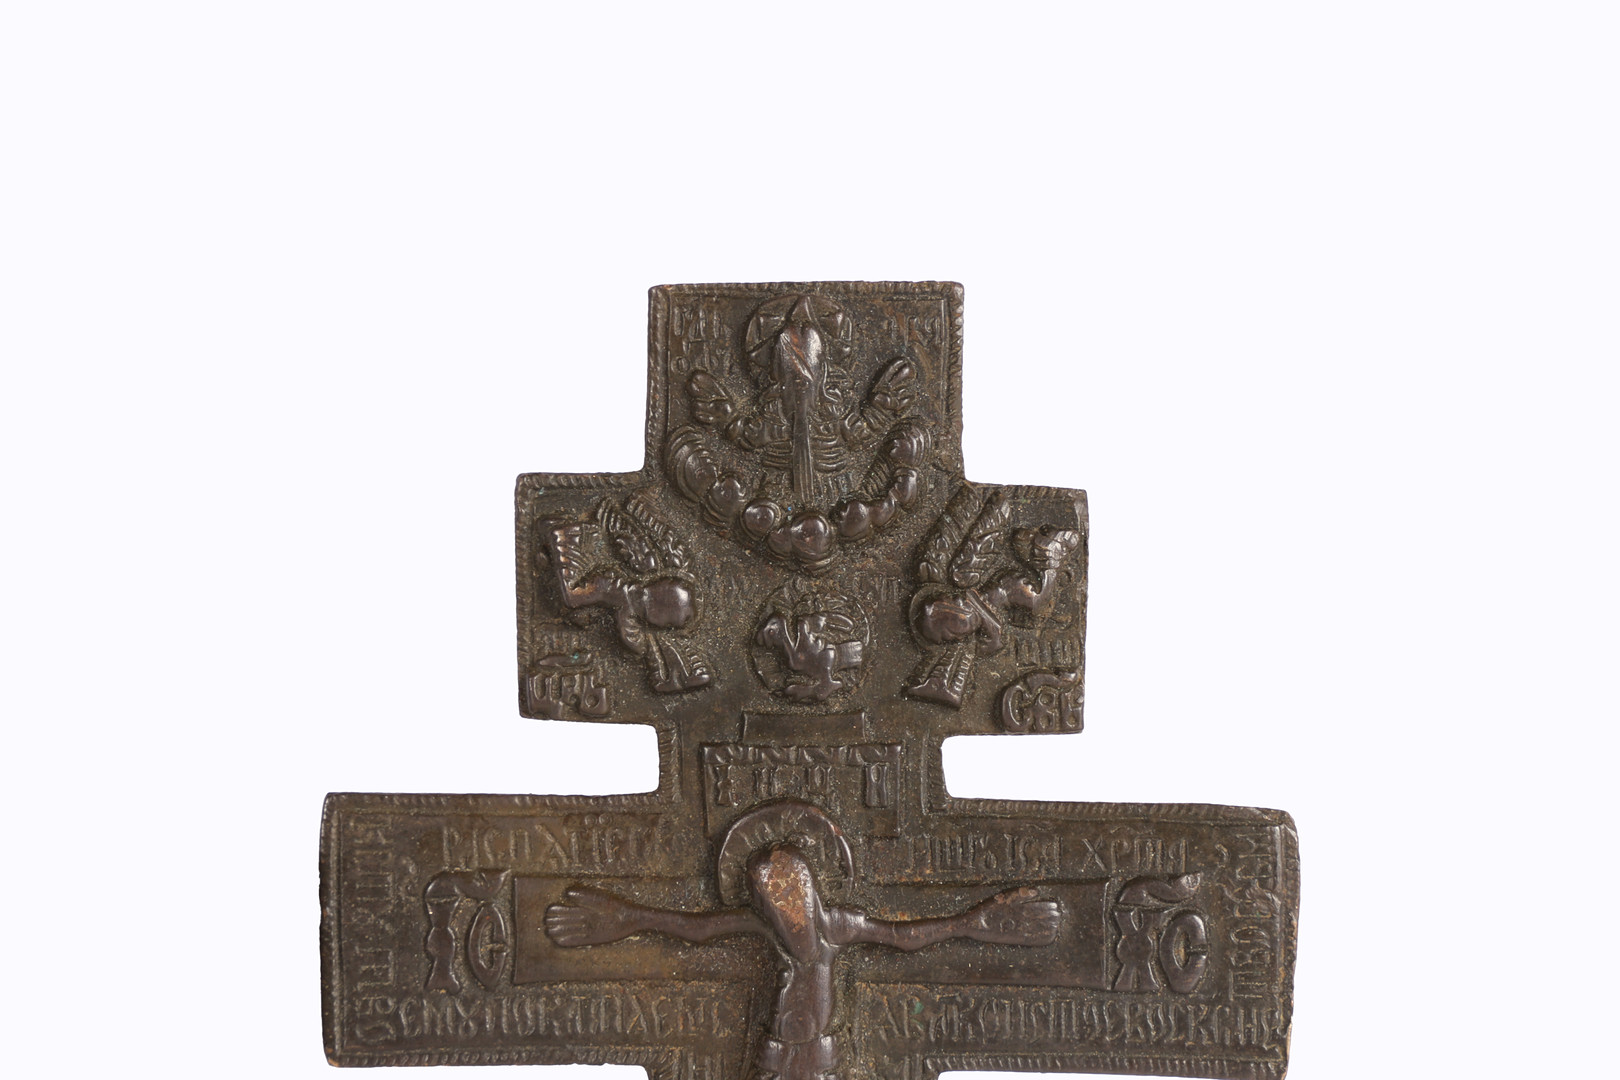 TWO 19TH CENTURY RUSSIAN ORTHODOX BRONZE ICONS. - Image 7 of 10